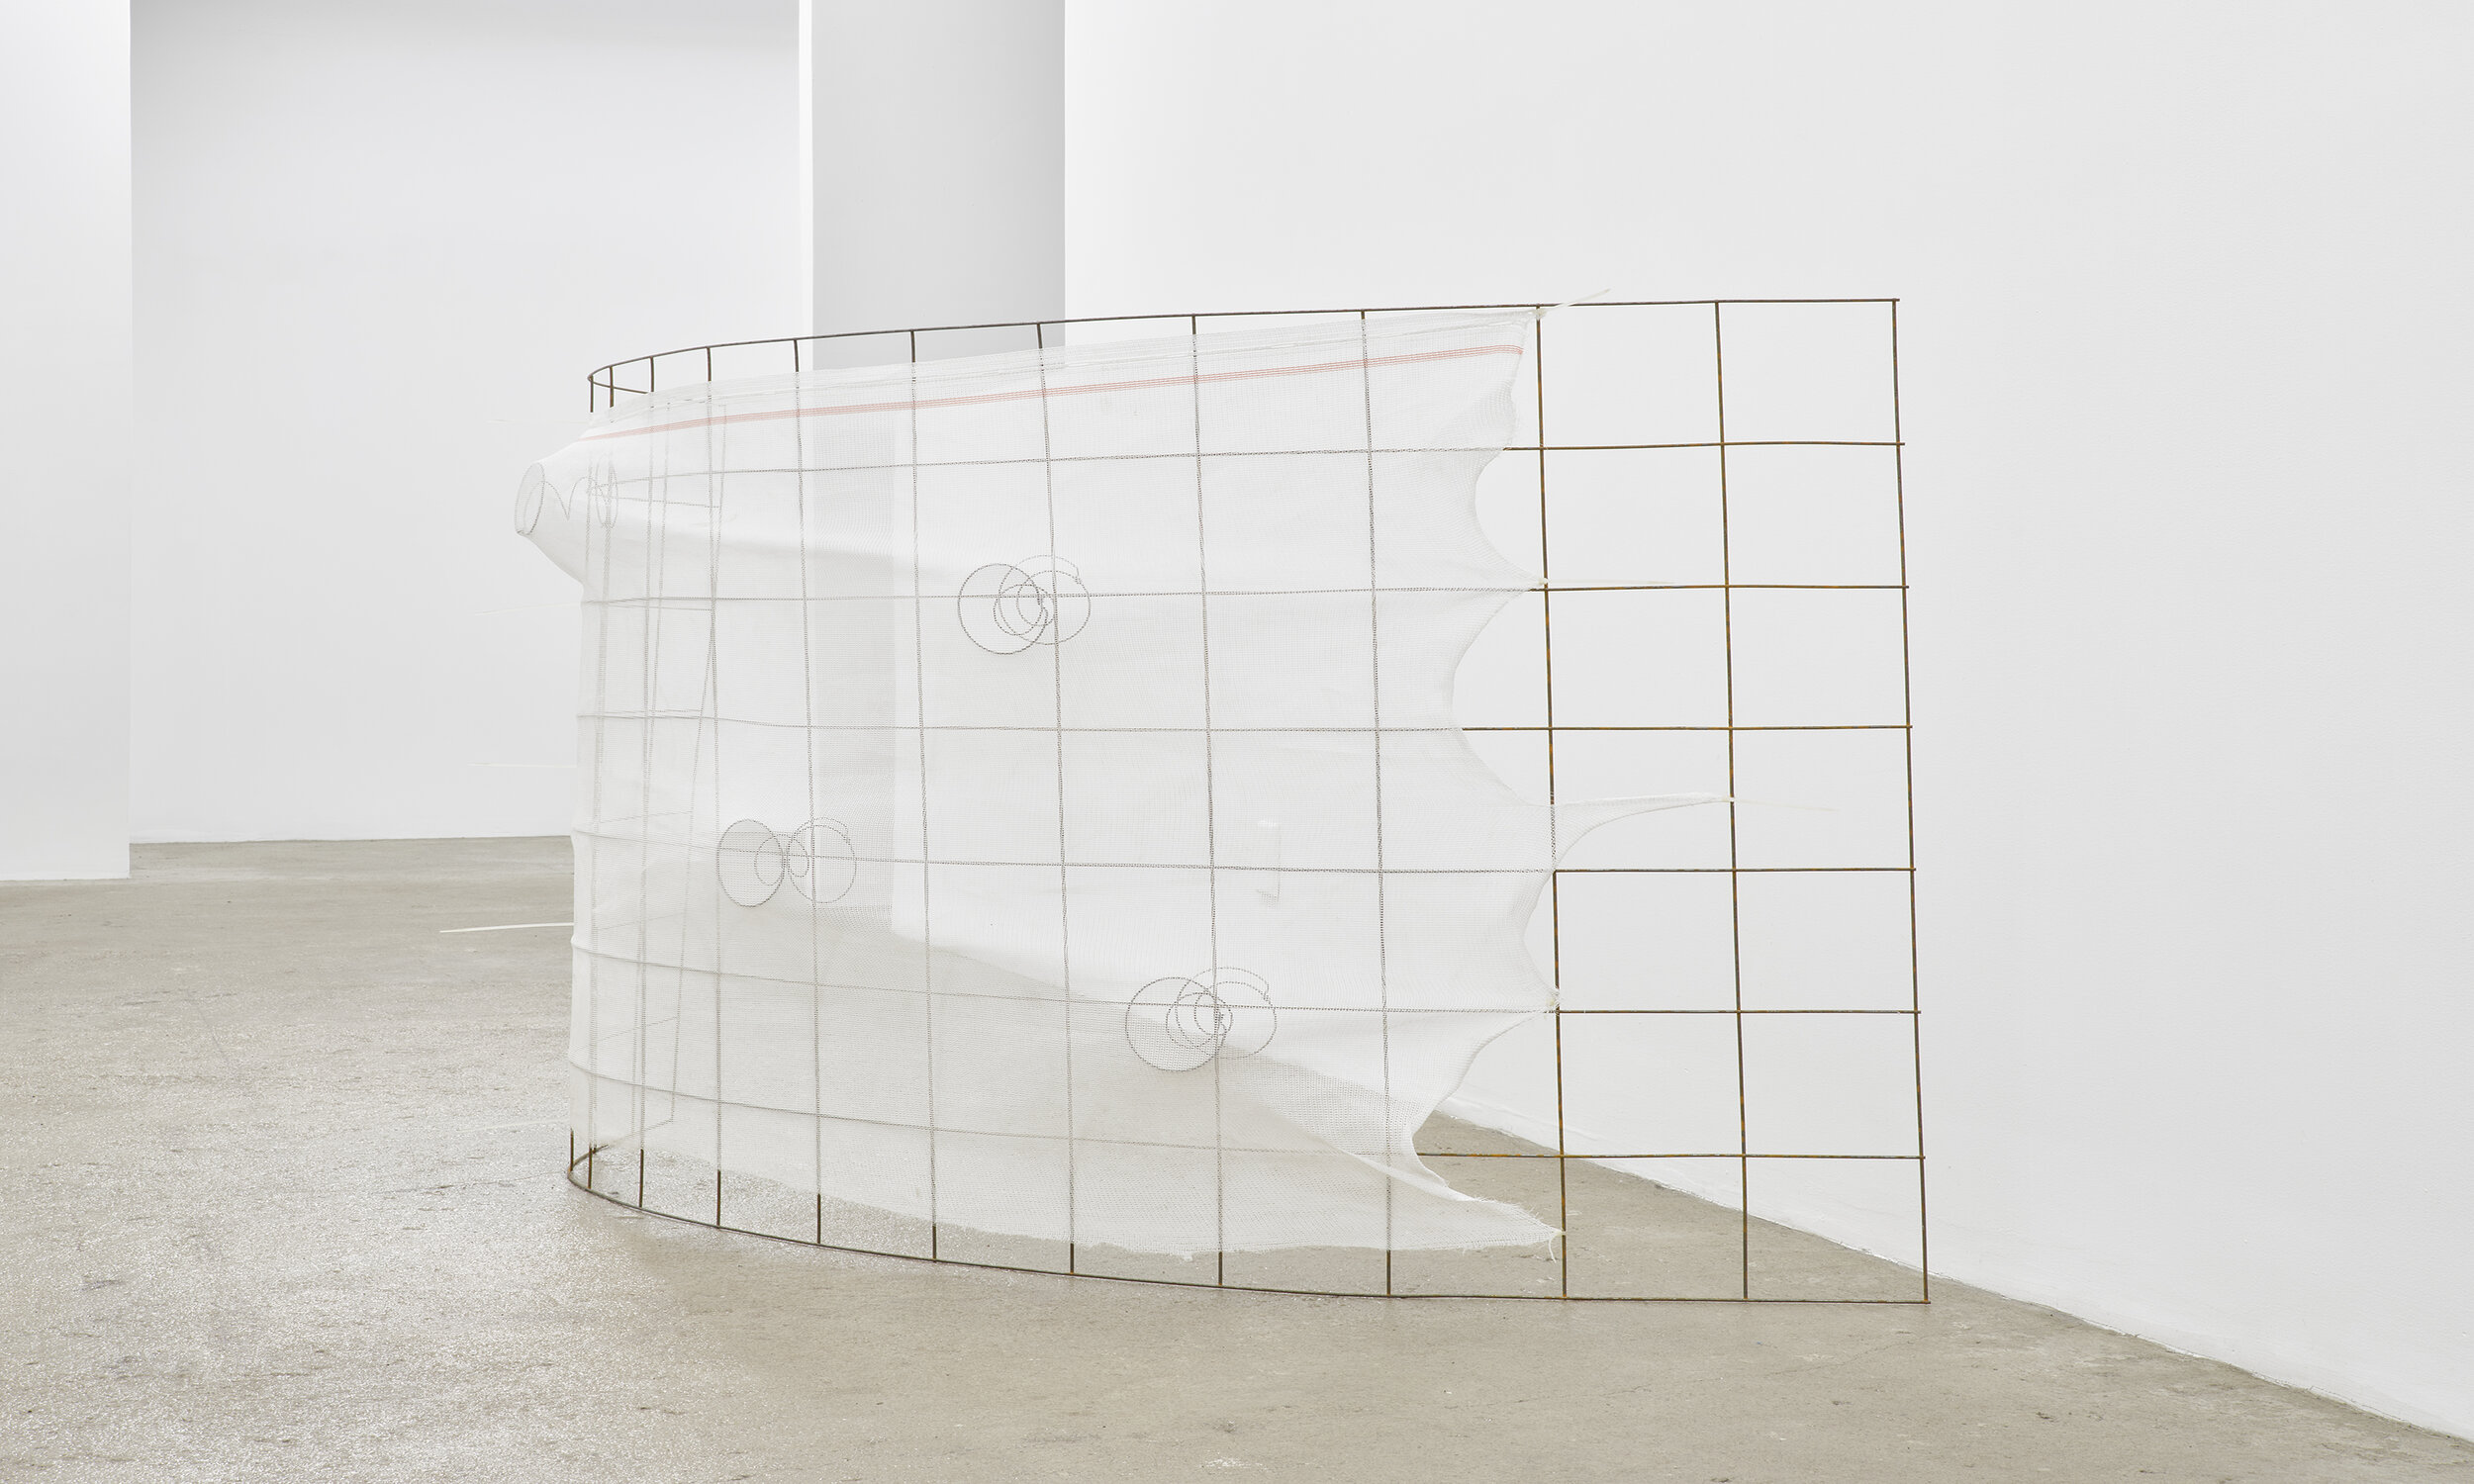  Bat-Ami Rivlin  Untitled (remesh, 4 springs, net, zip locks), 2019  steel wire remesh, springs,  debris safety netting, cable ties  42 x 69 x 27 inches (107 x 175 x 156 cm) BR9 